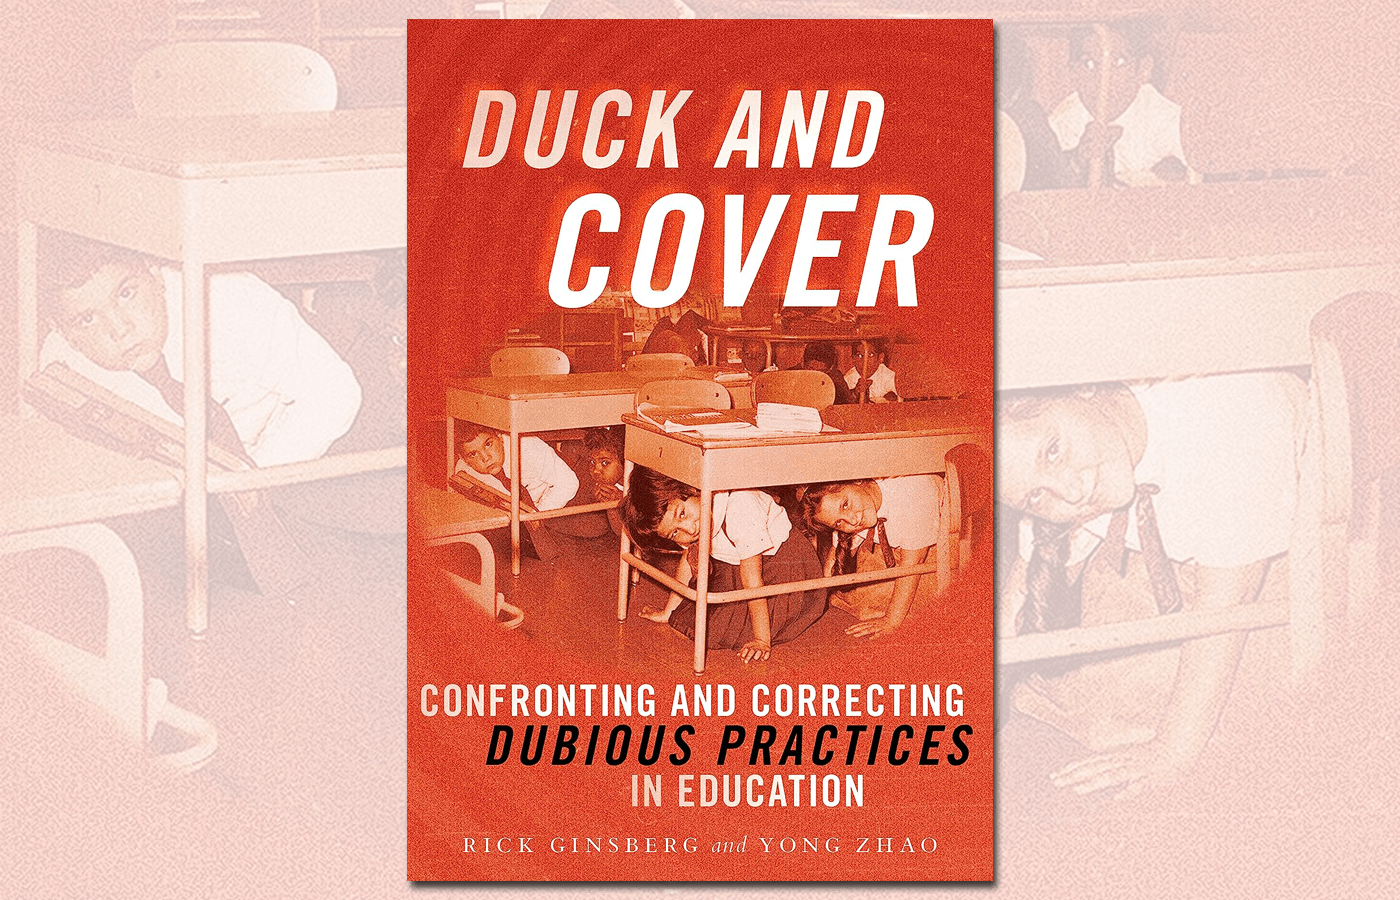 july23 blog hess duck and cover